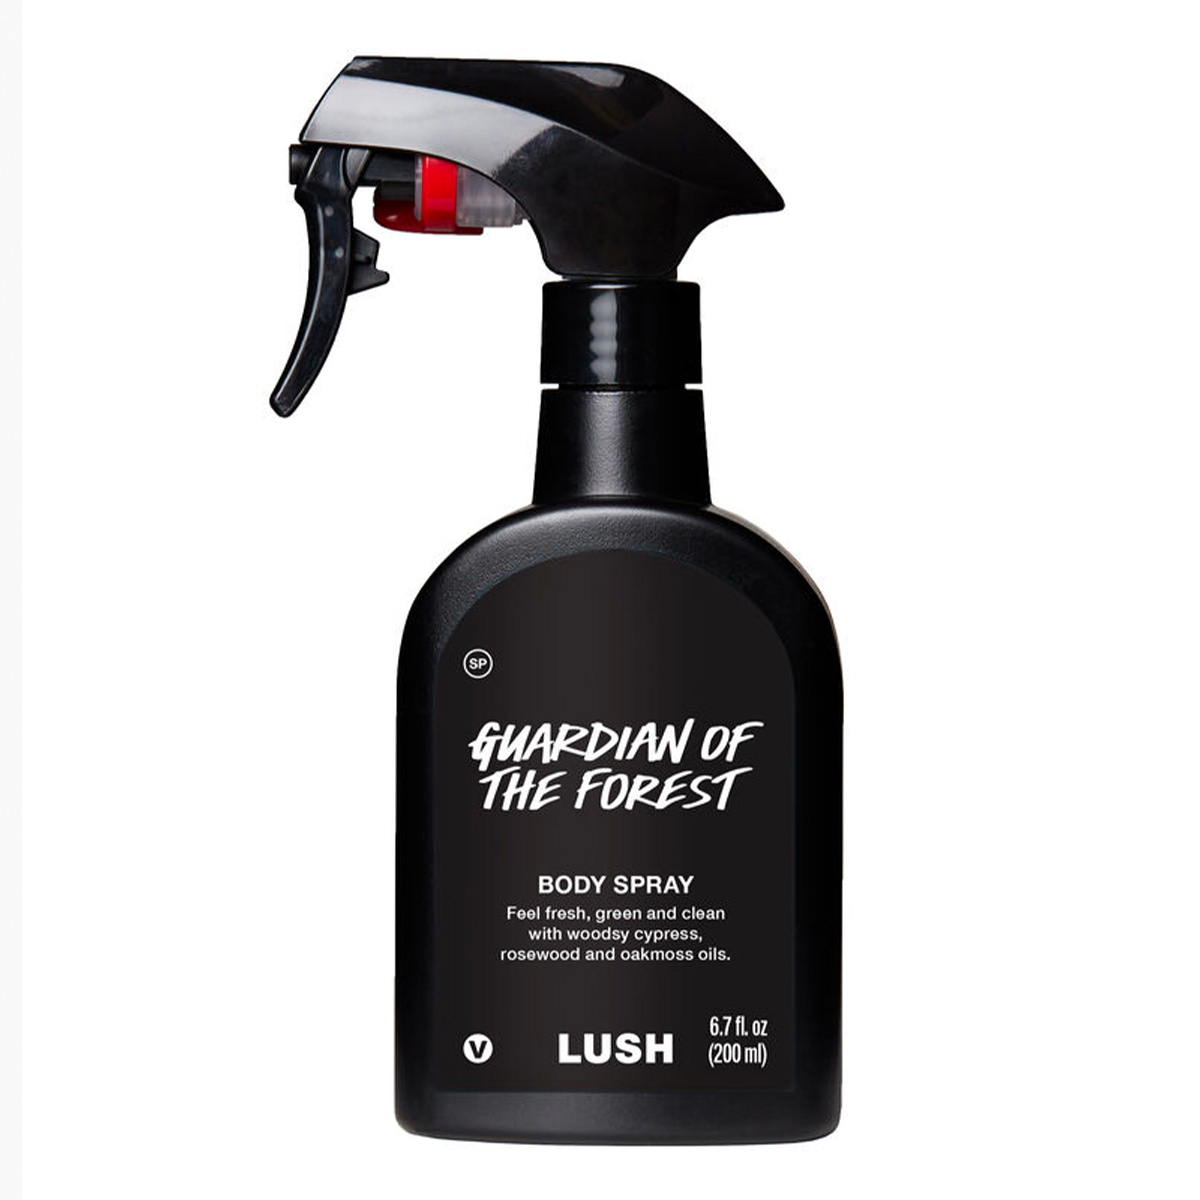 A product of Lush Guardian of the Forest Body Spray